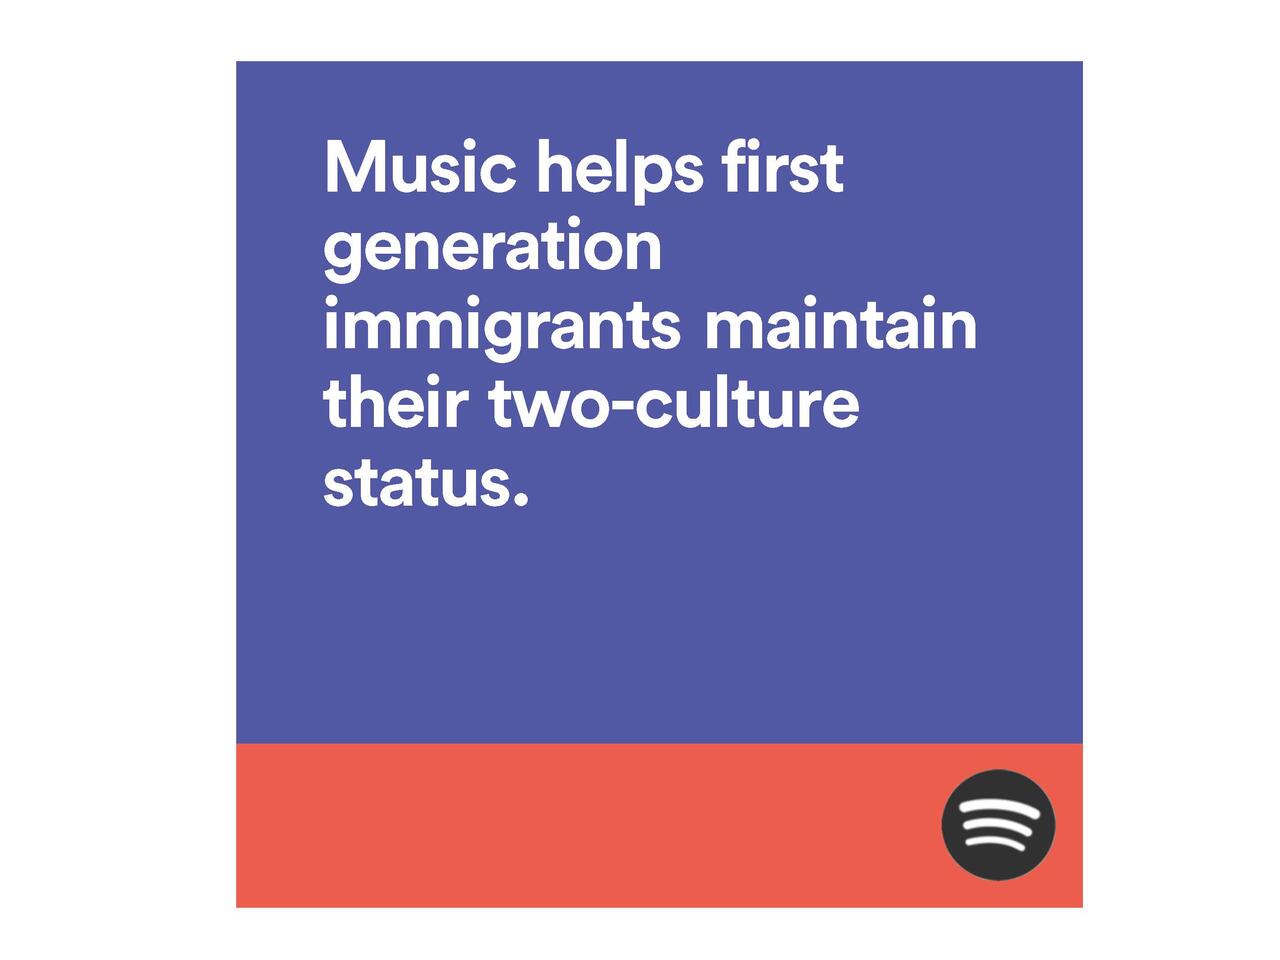 Potential Spotify advertisement with a focus on reaching out to immigrant listeners. 